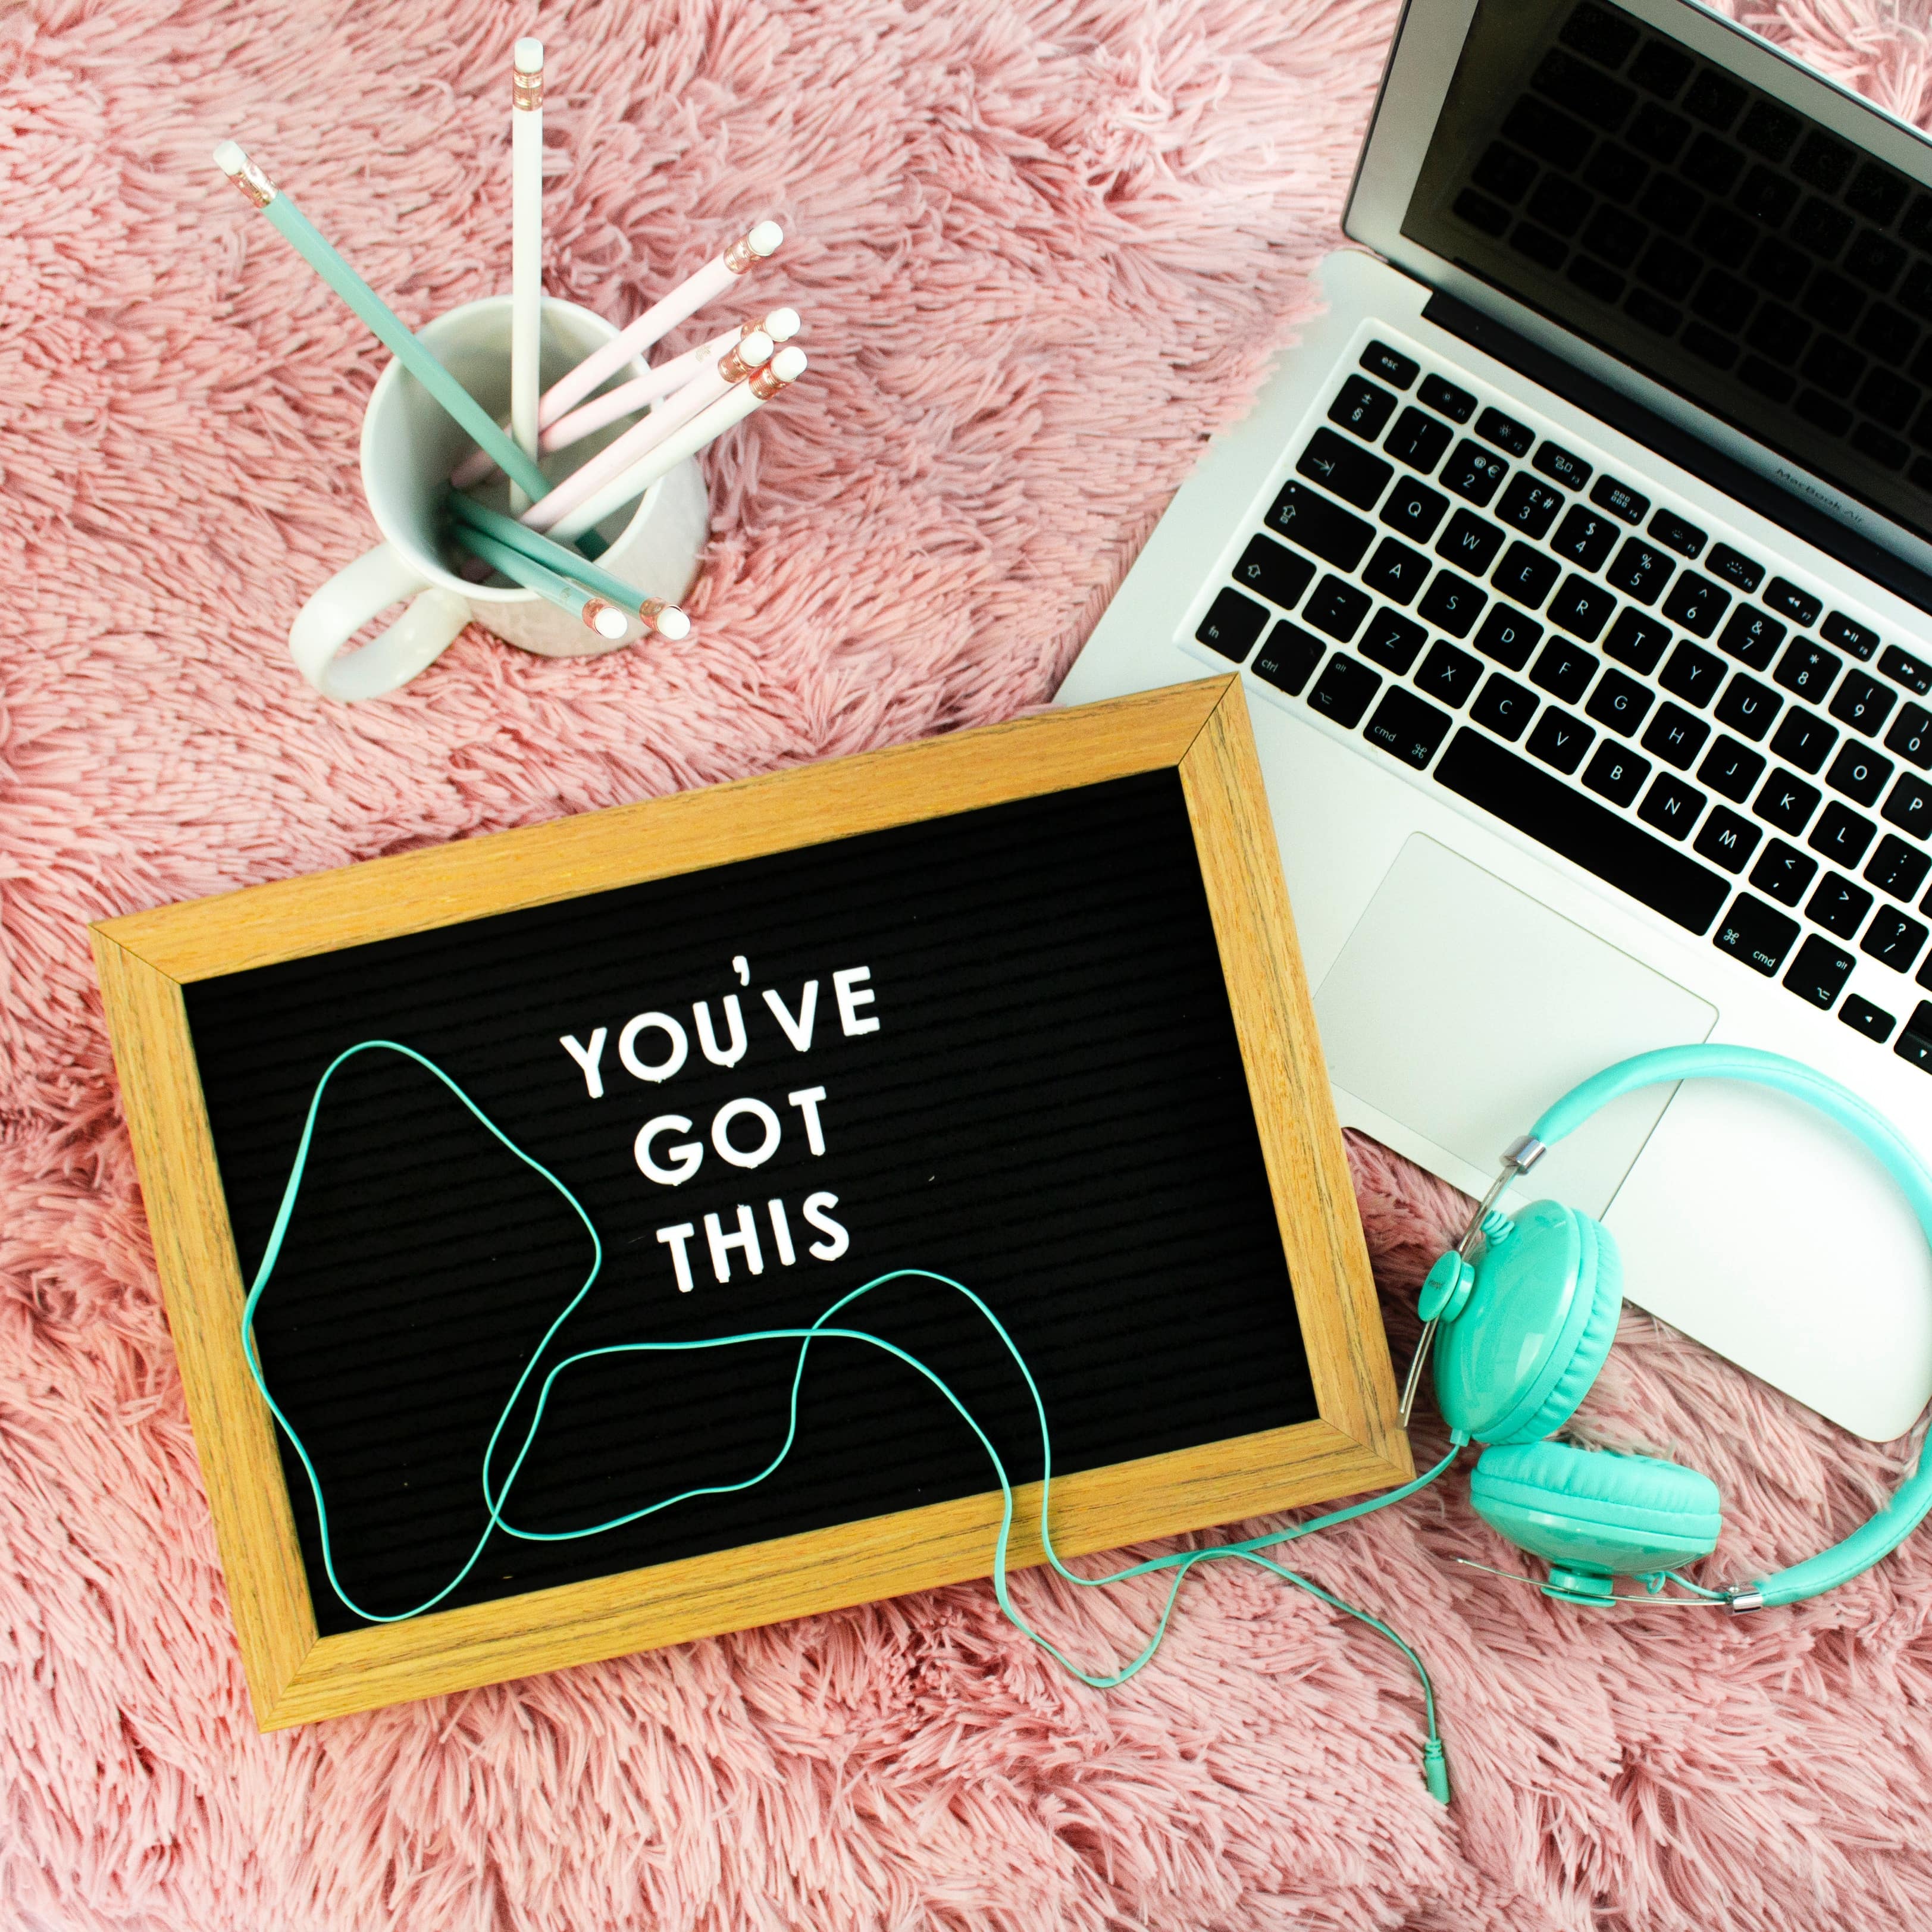 Laptop, headphones, and chalkboard that says “You’ve Got This”